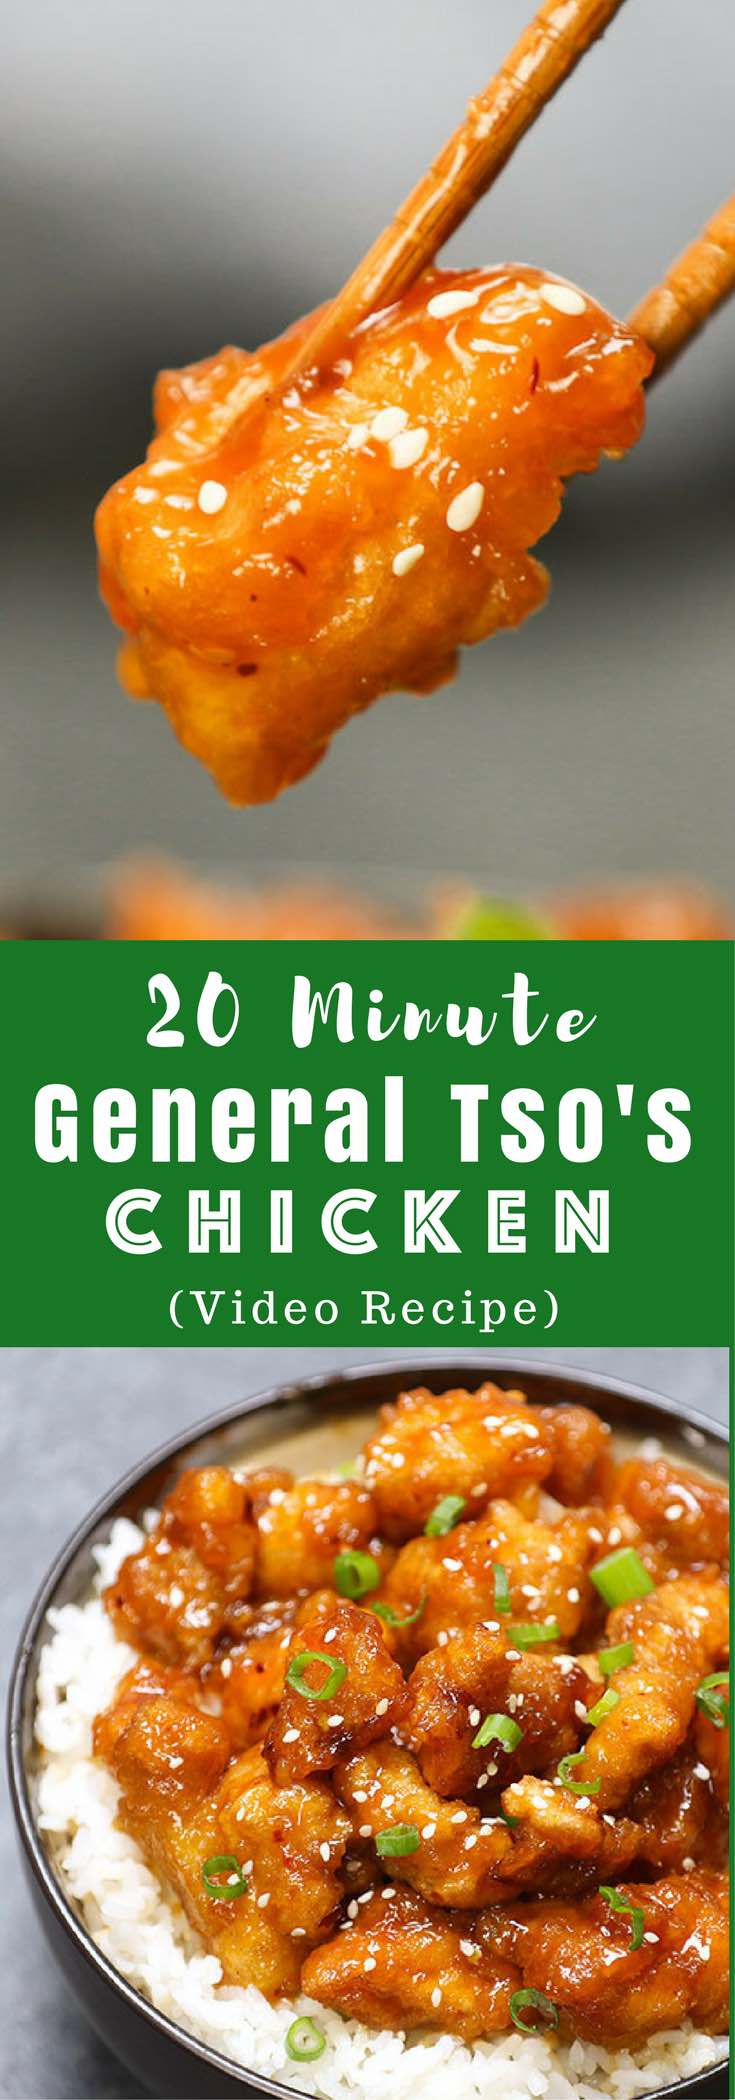 Better than take-out General Tso’s Chicken for the perfect easy weeknight dish- crispy, tender and sweet! It will be on your dinner table in 20 minutes. All you need is just a few simple ingredients: chicken breast, corn starch, garlic, ginger hoisin sauce, soy sauce, rice vinegar and sugar. So delicious! Easy dinner recipe. Video recipe. | Tipbuzz.com